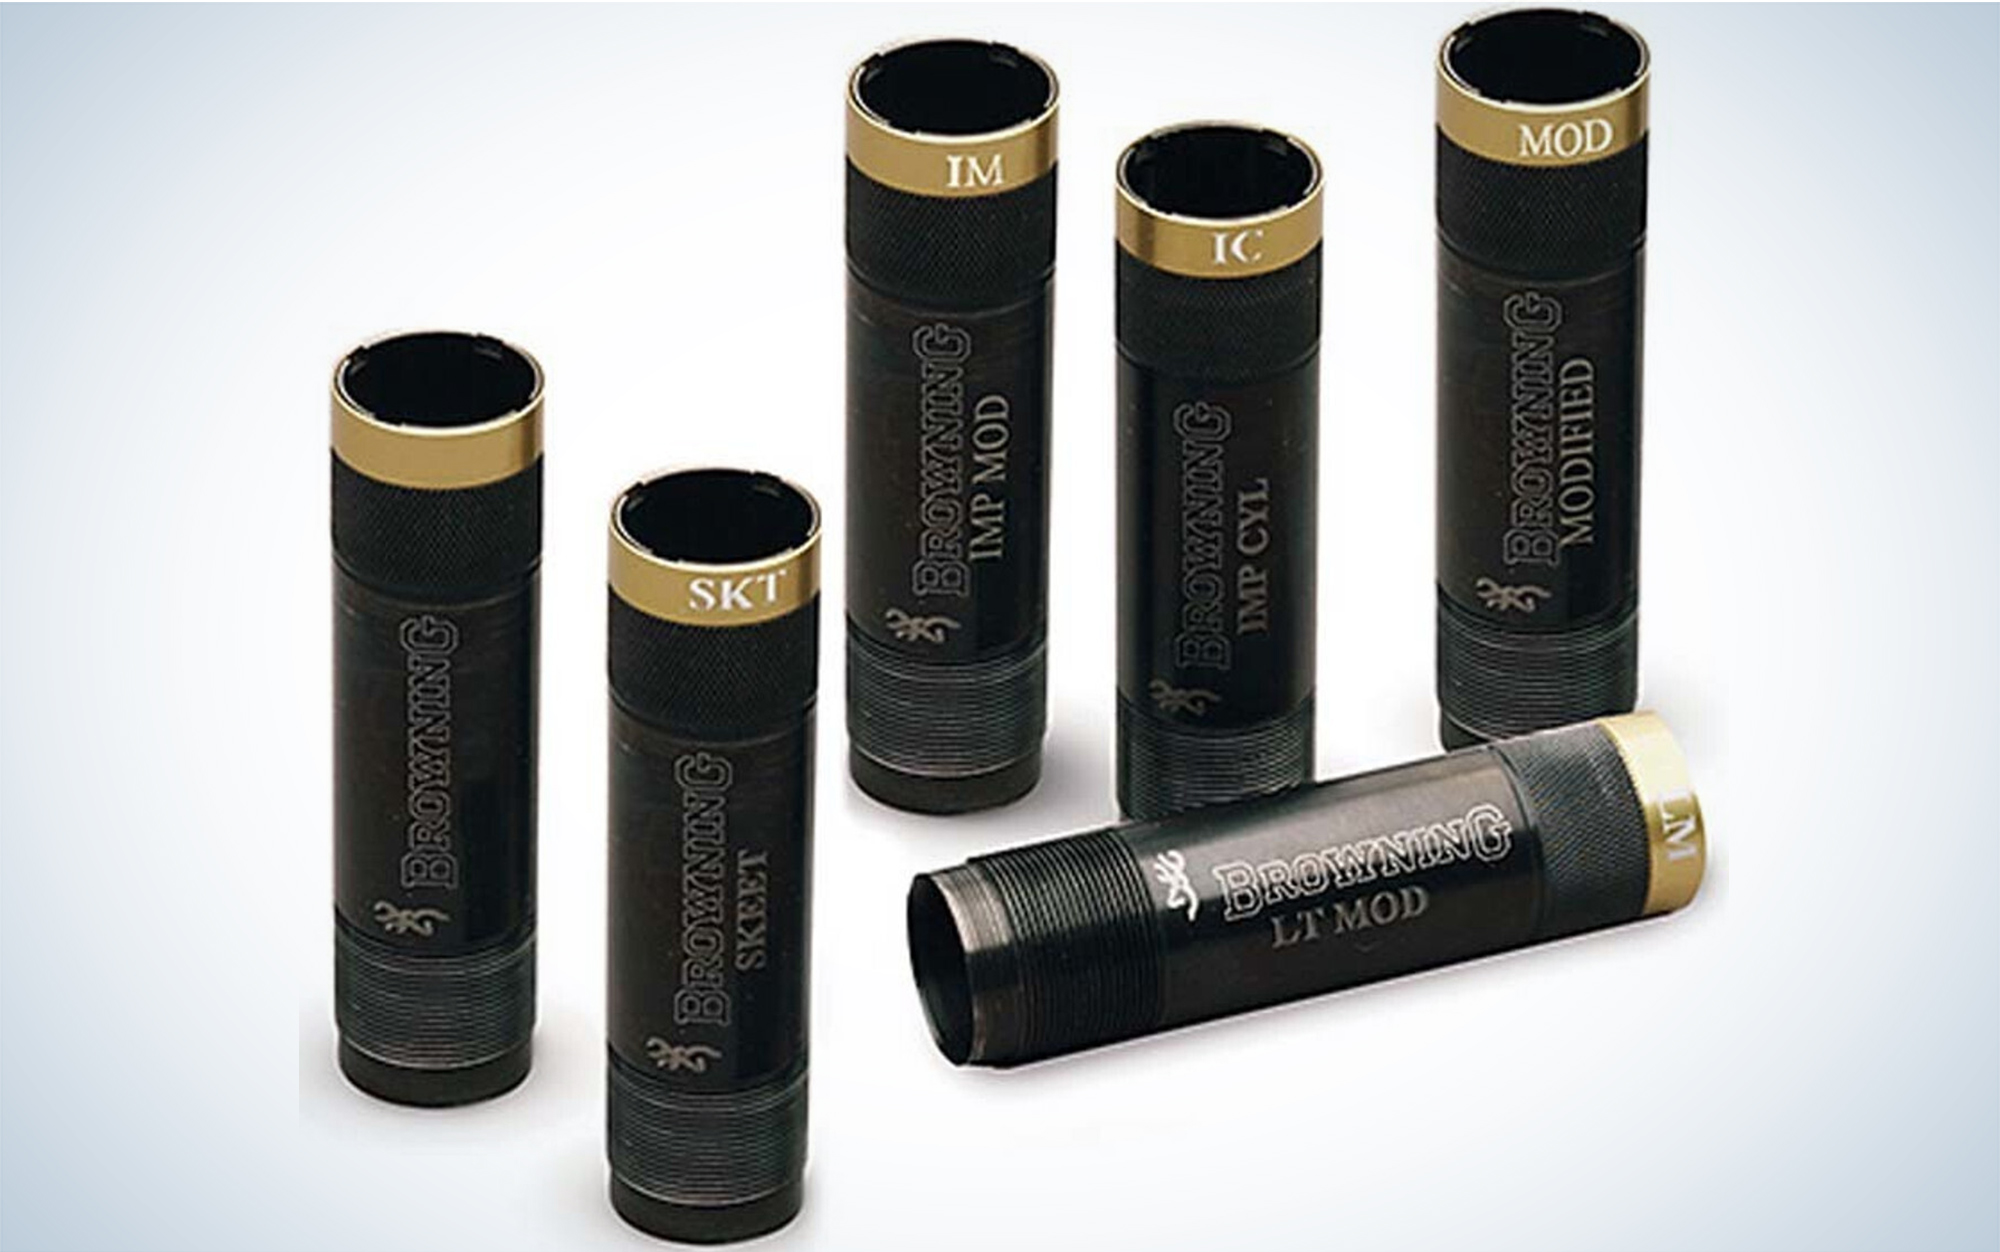 Browning Midas Chokes are some of the best chokes for sporting clays.